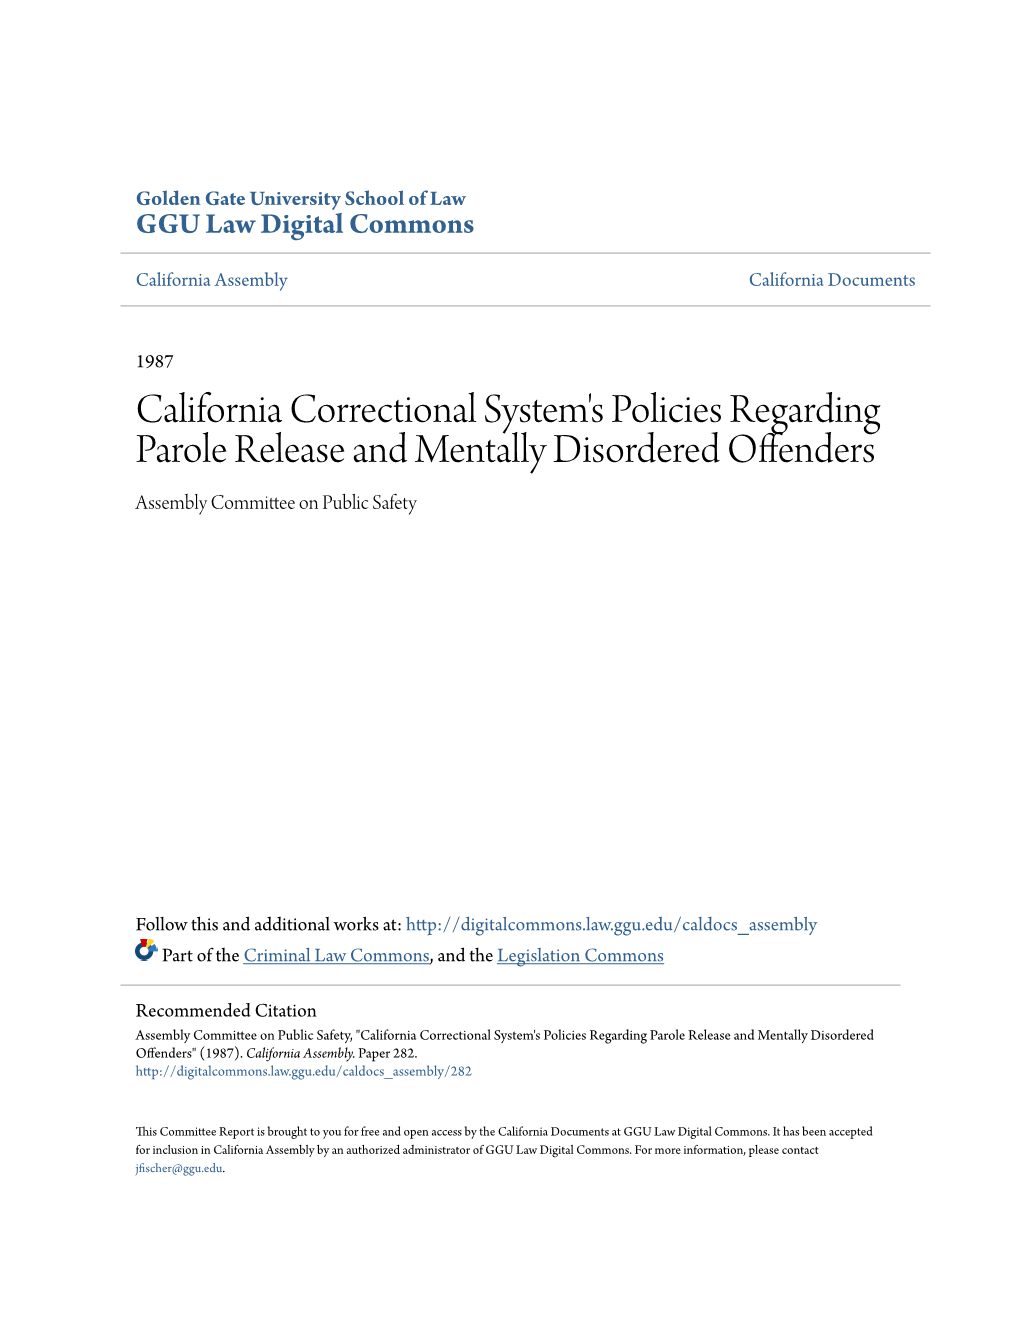 California Correctional System's Policies Regarding Parole Release and Mentally Disordered Offenders Assembly Committee on Public Safety